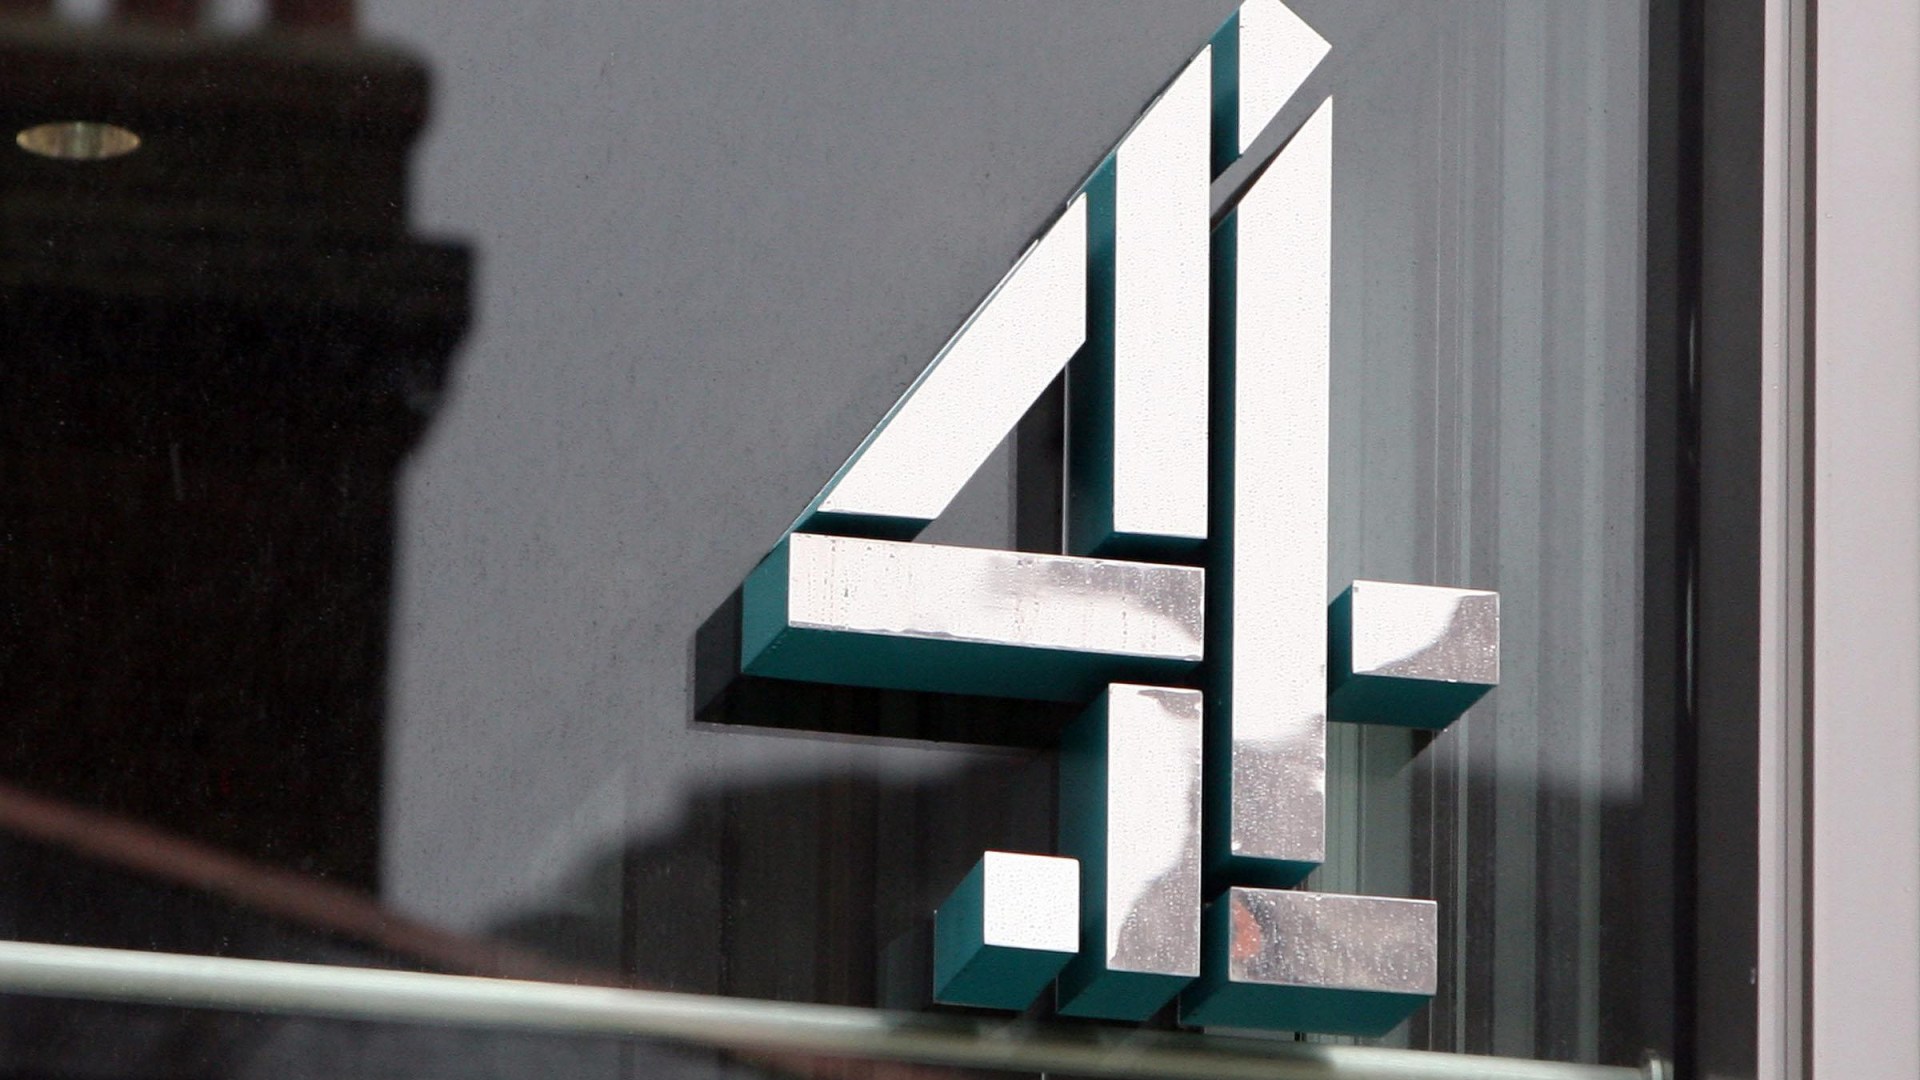 Survival series slashed by Channel 4 in response to harsh reviews and budget cuts – Learn why!